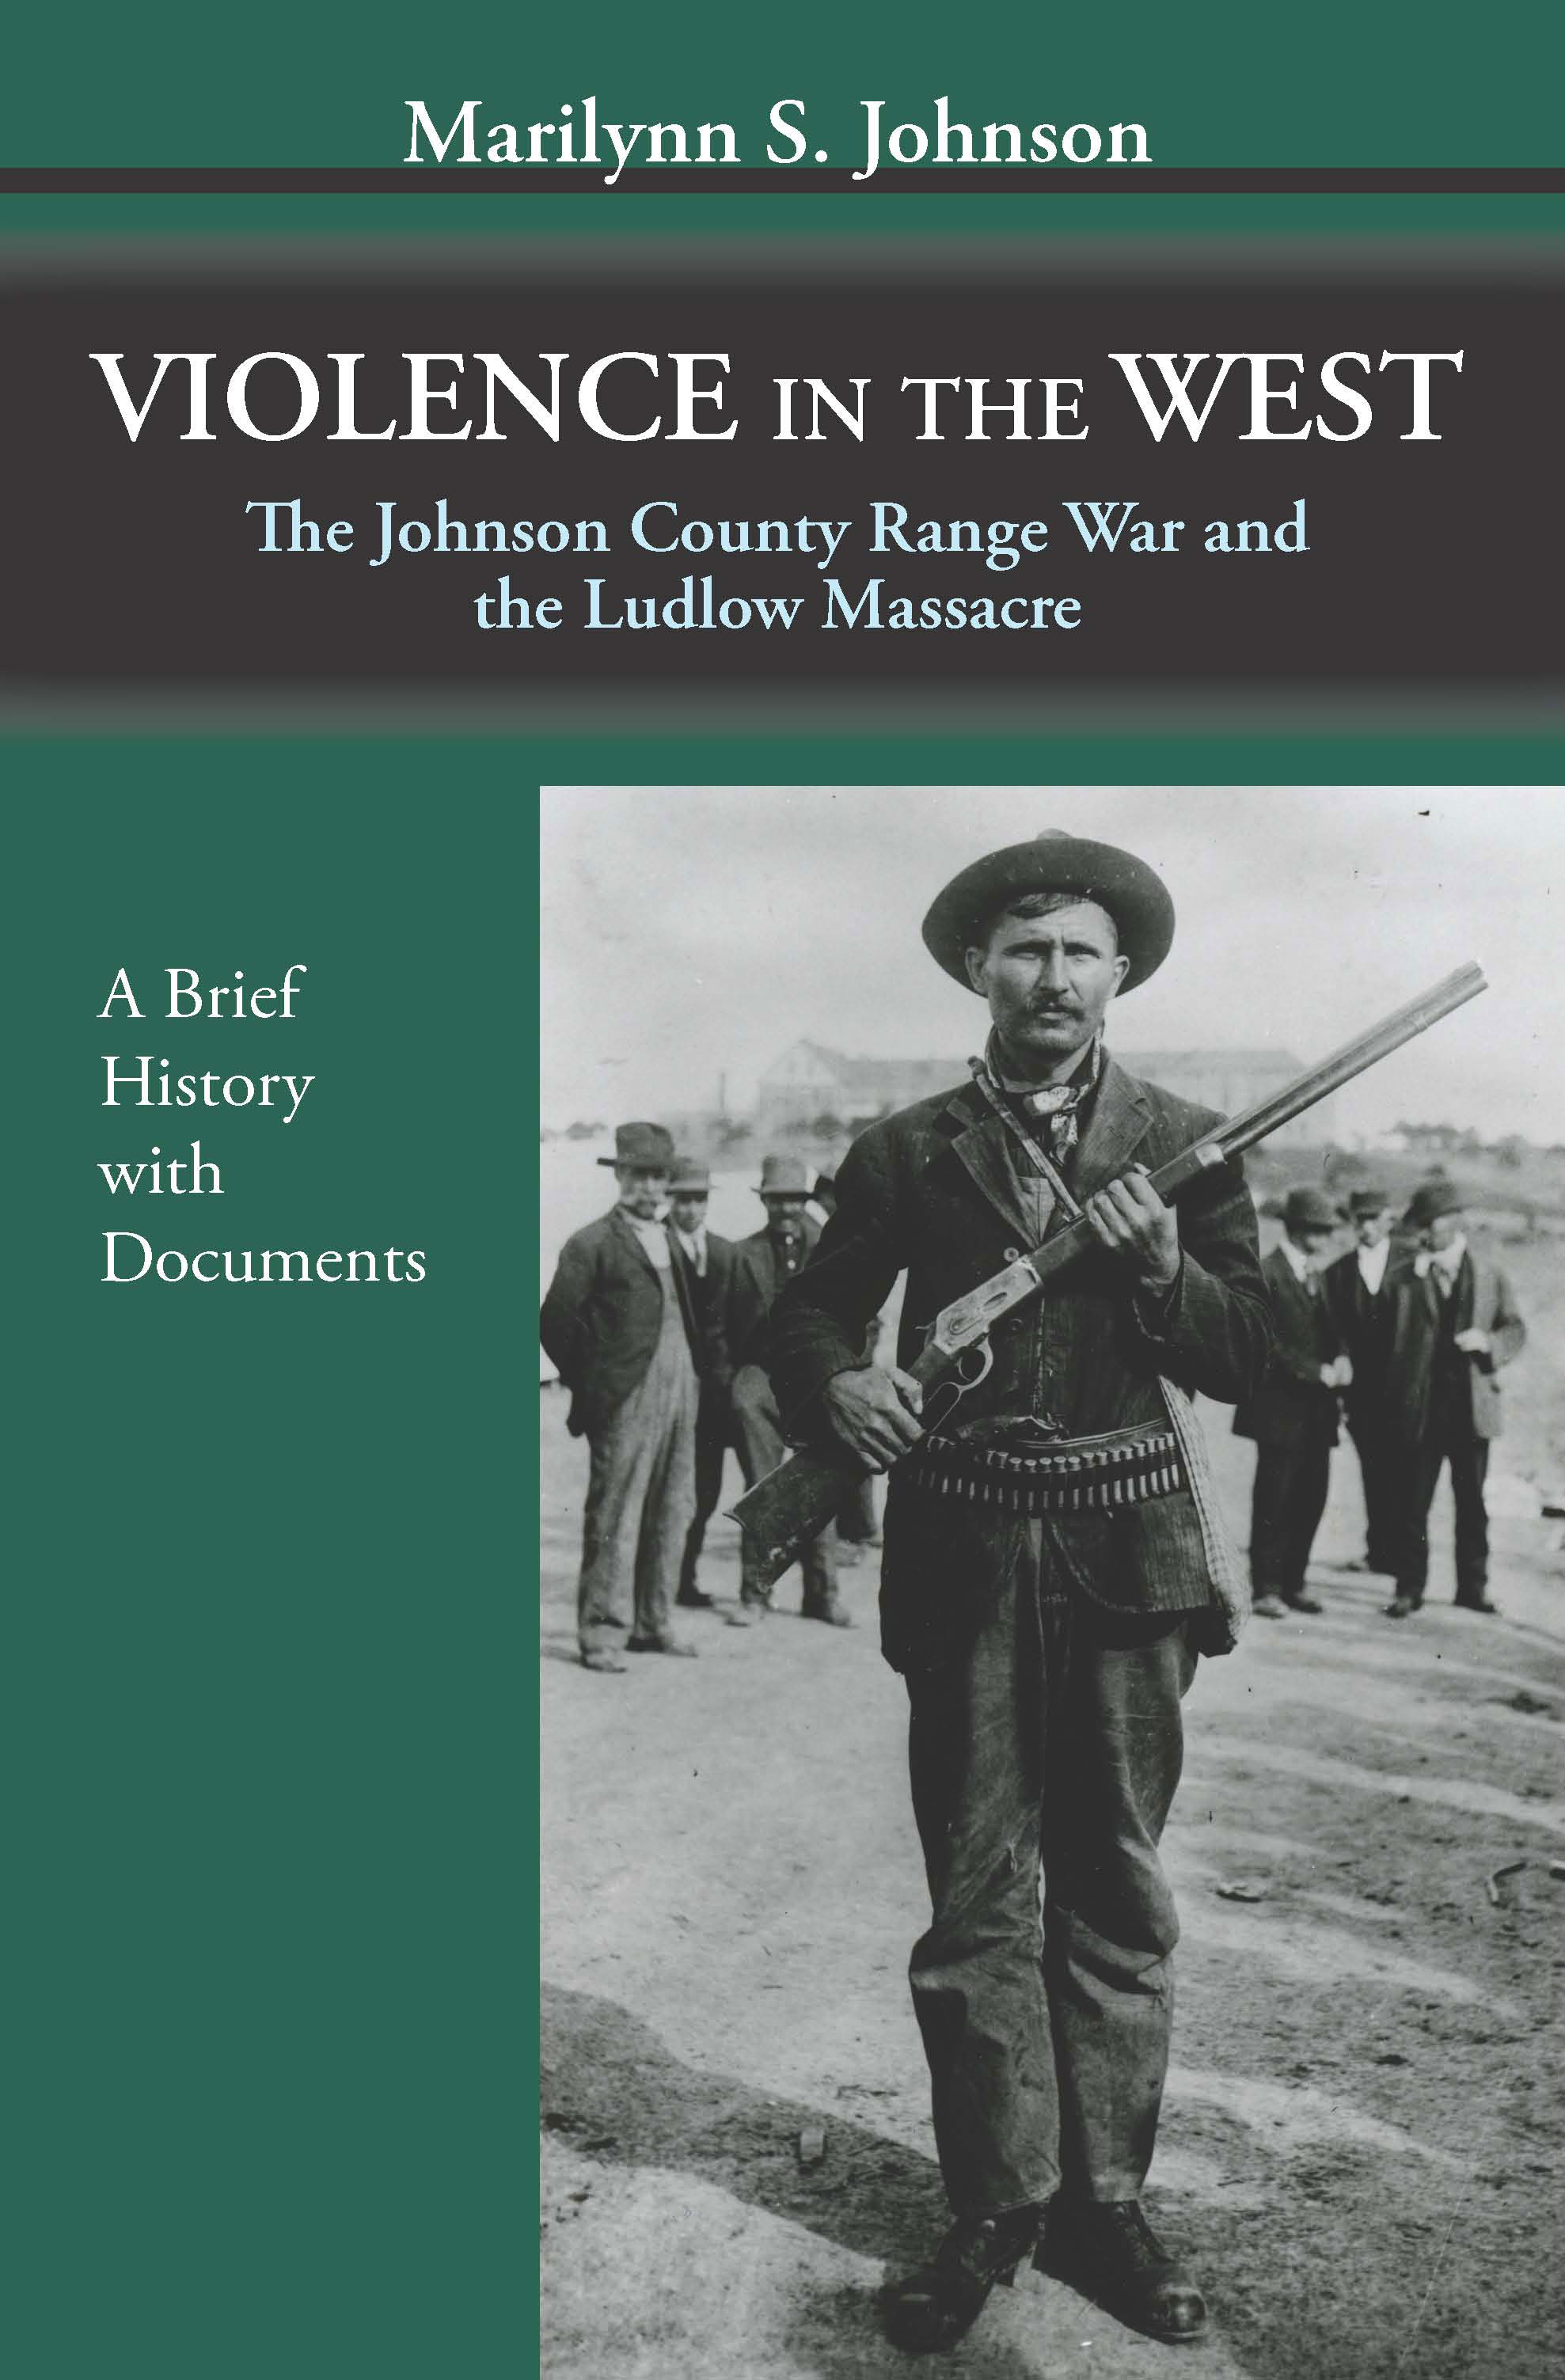 Violence in the West: The Johnson County Range War and the Ludlow Massacre—A Brief History with Documents by Marilynn S. Johnson